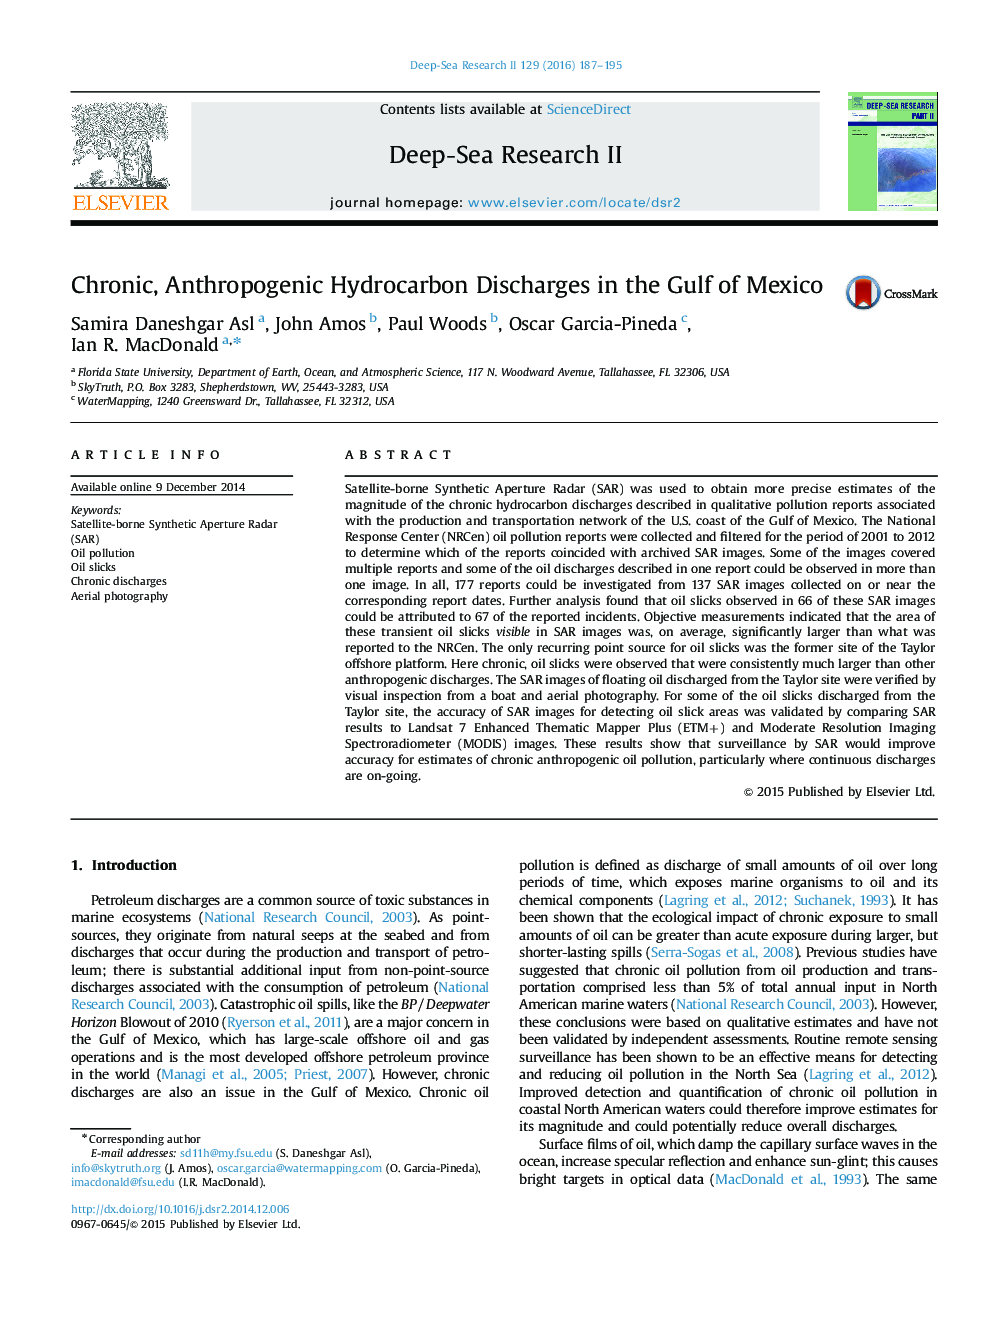 Chronic, Anthropogenic Hydrocarbon Discharges in the Gulf of Mexico